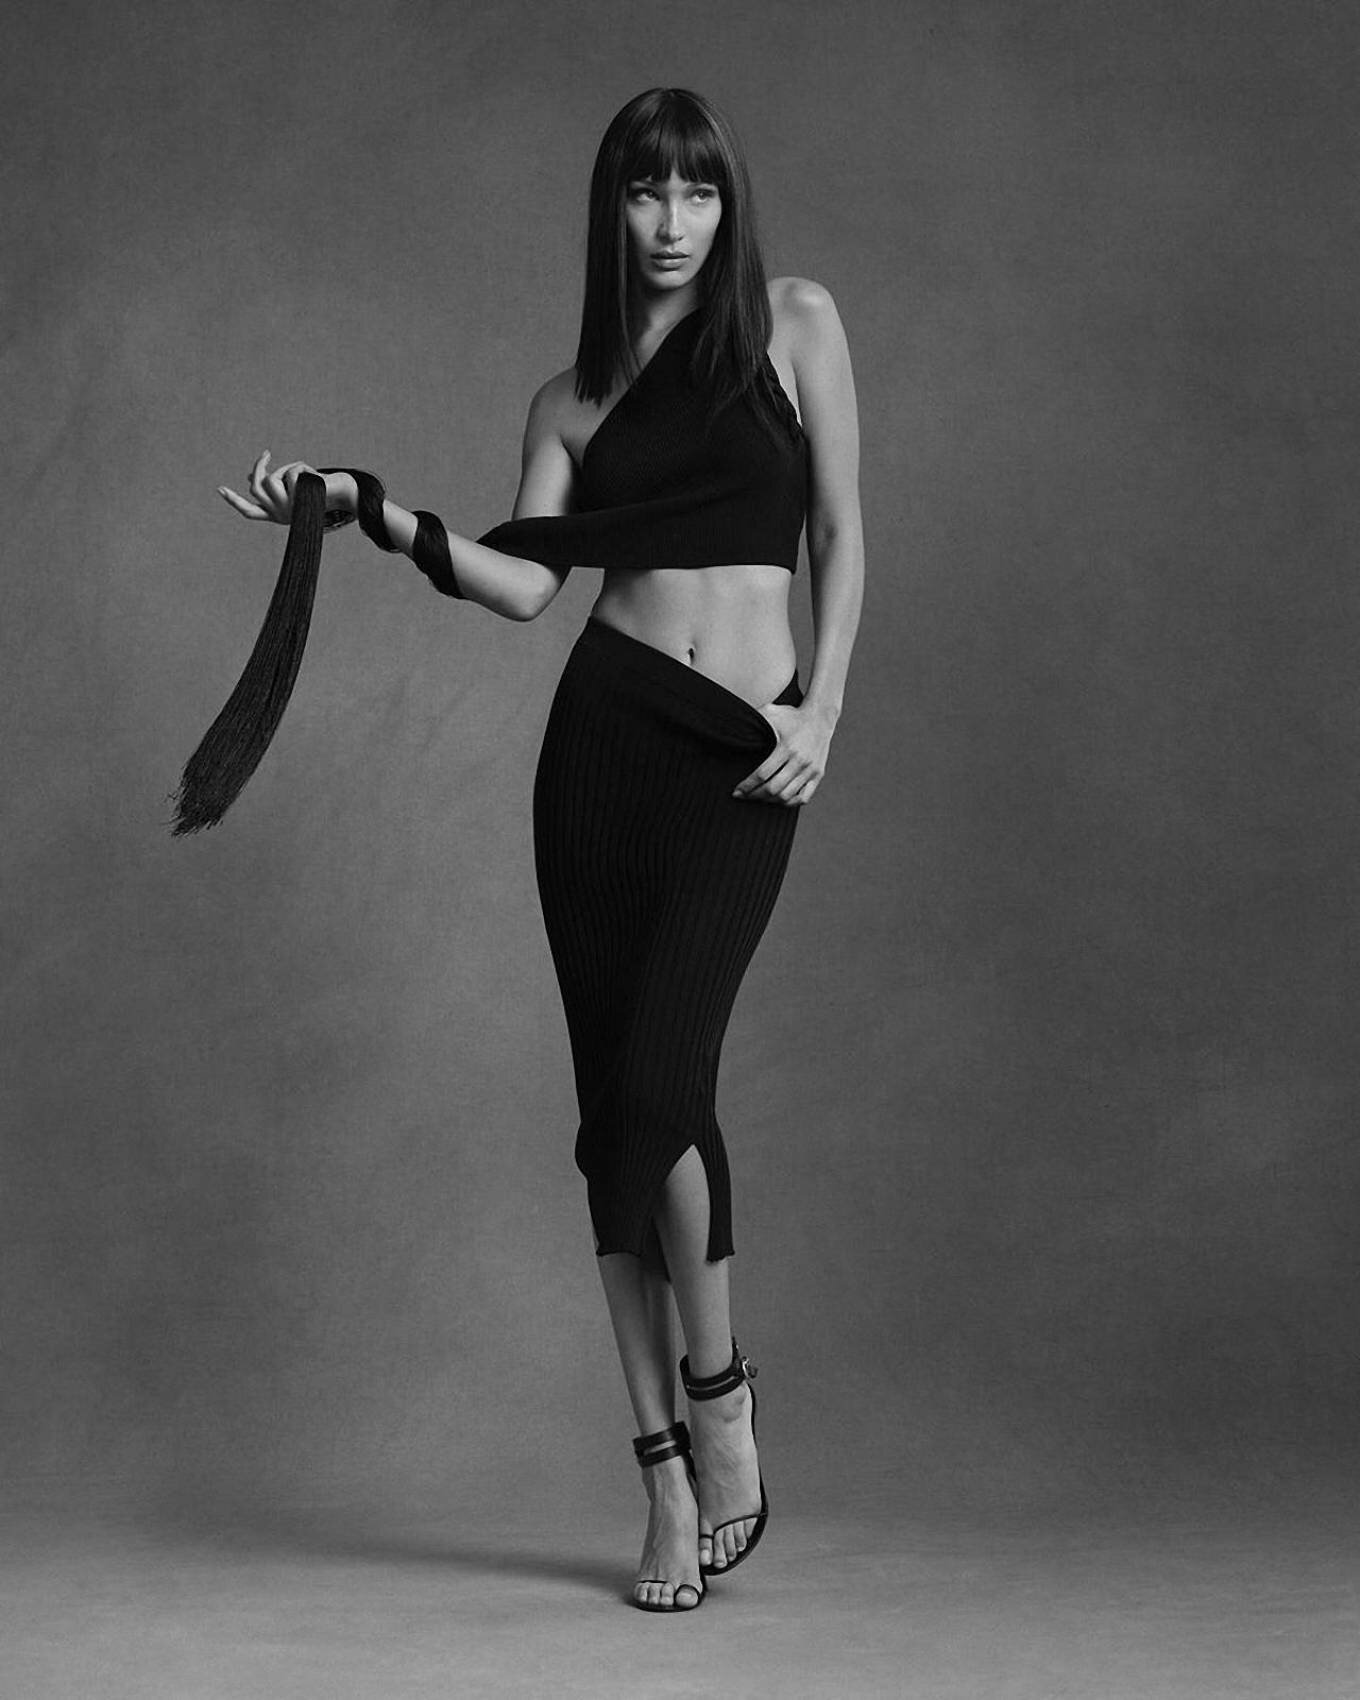 Bella Hadid by Ethan James Green for Helmut Lang Pre-Fall 2020 Campaign (4).jpg